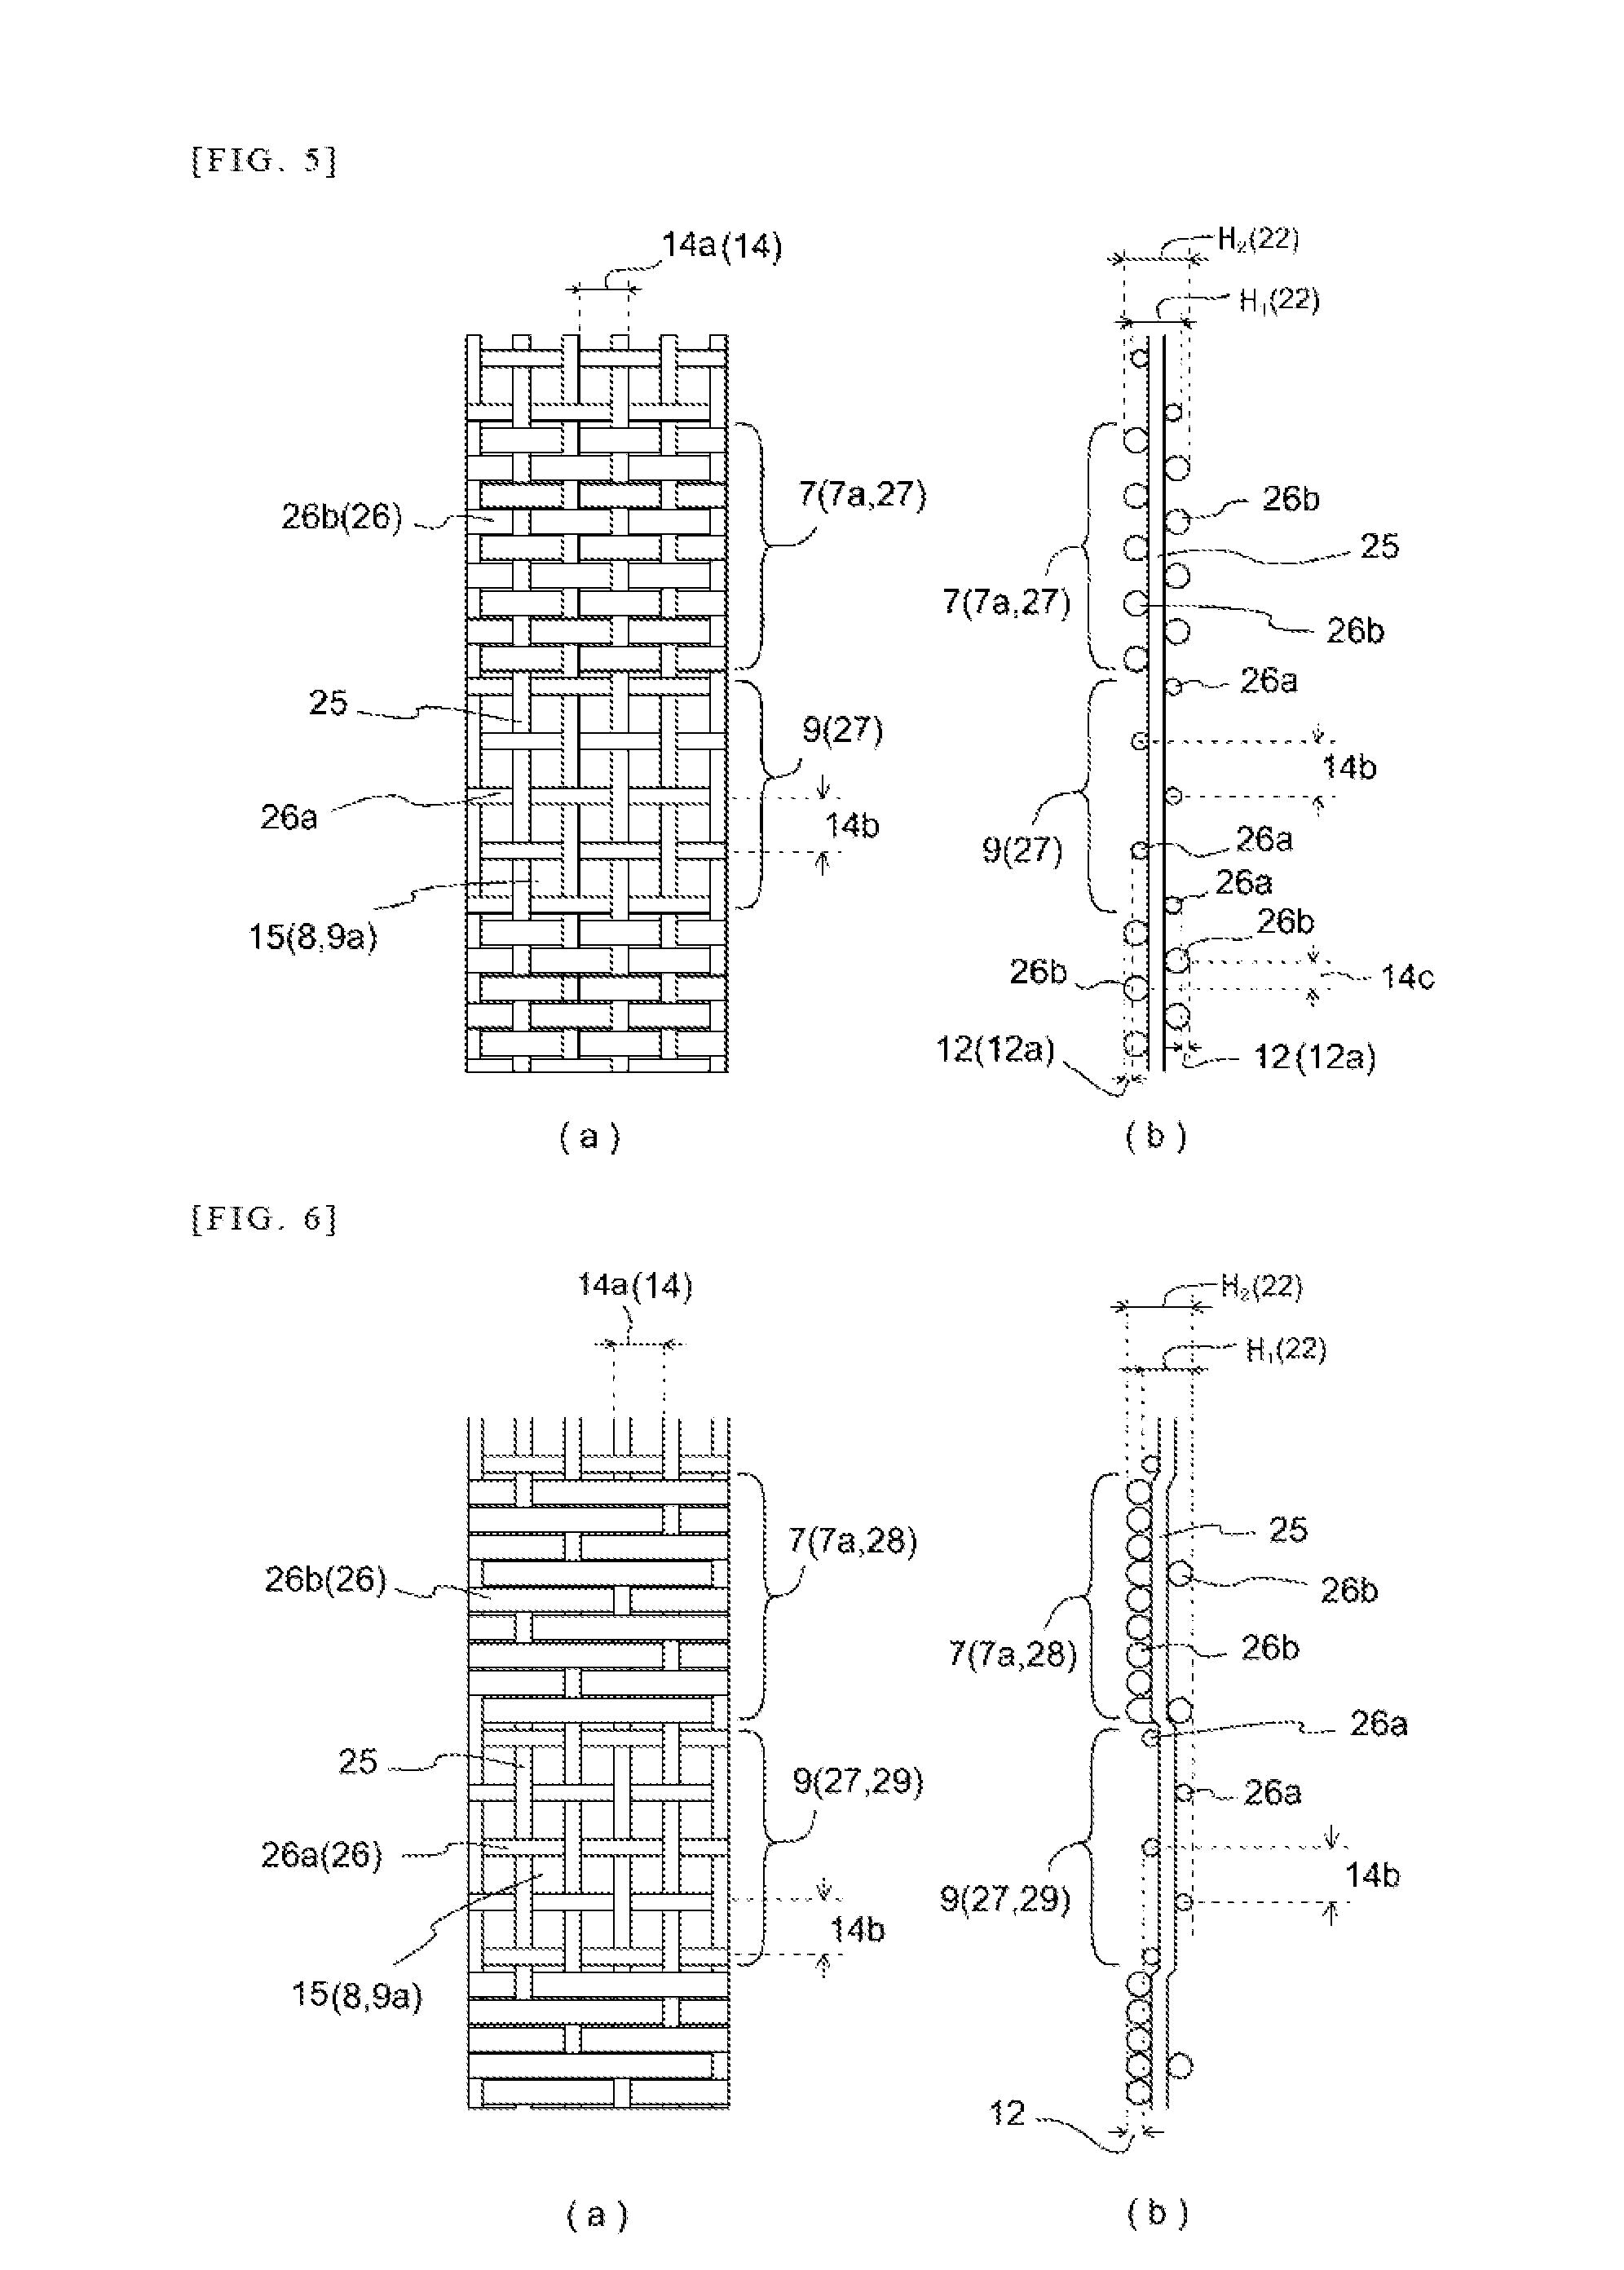 Roller covered with covering comprising woven fabric, and apparatus employing same